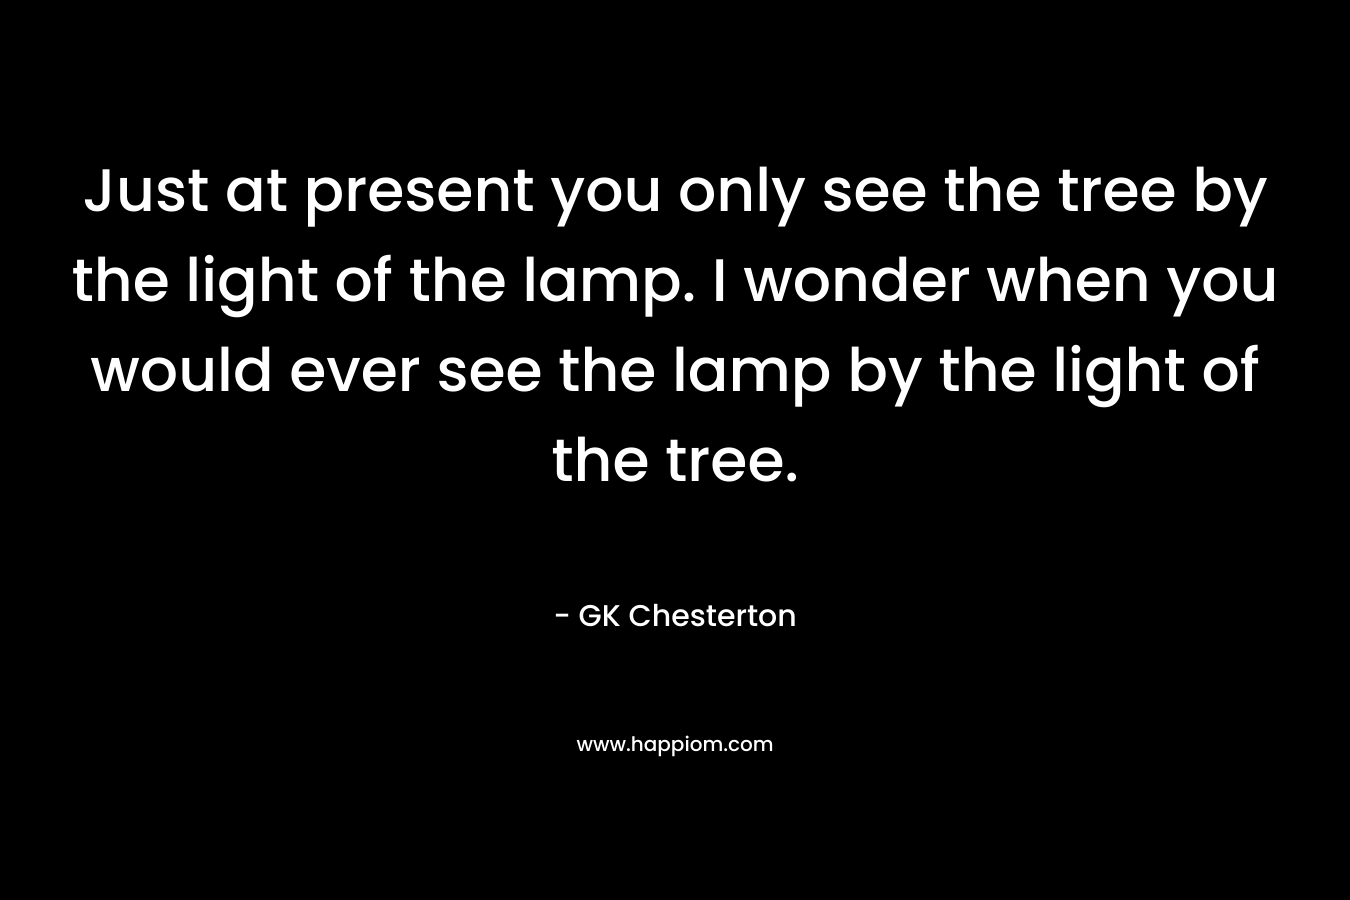 Just at present you only see the tree by the light of the lamp. I wonder when you would ever see the lamp by the light of the tree.